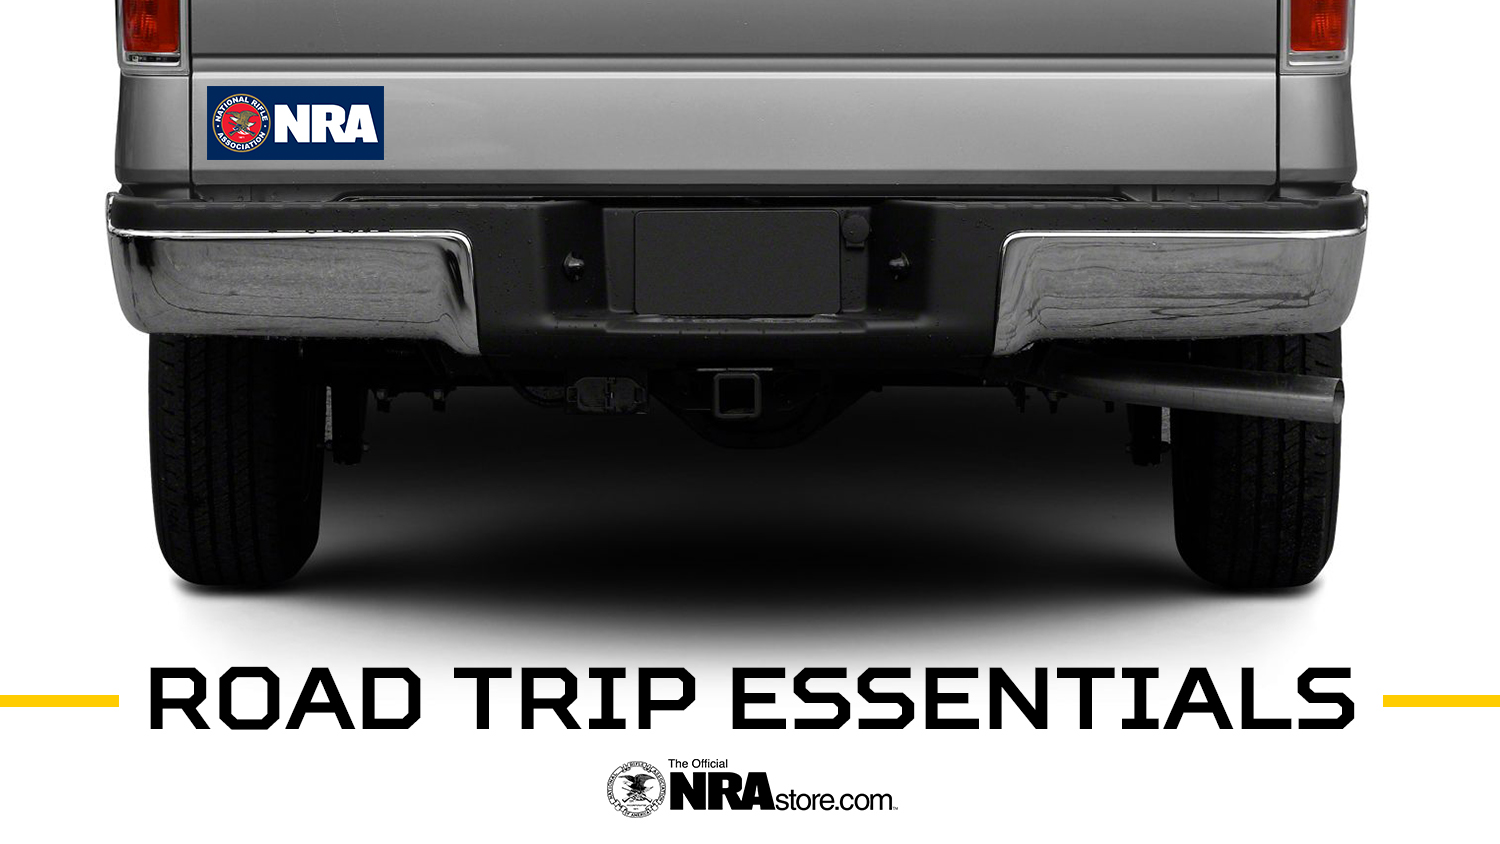 NRA Store Product Highlight: Road Trip Essentials 